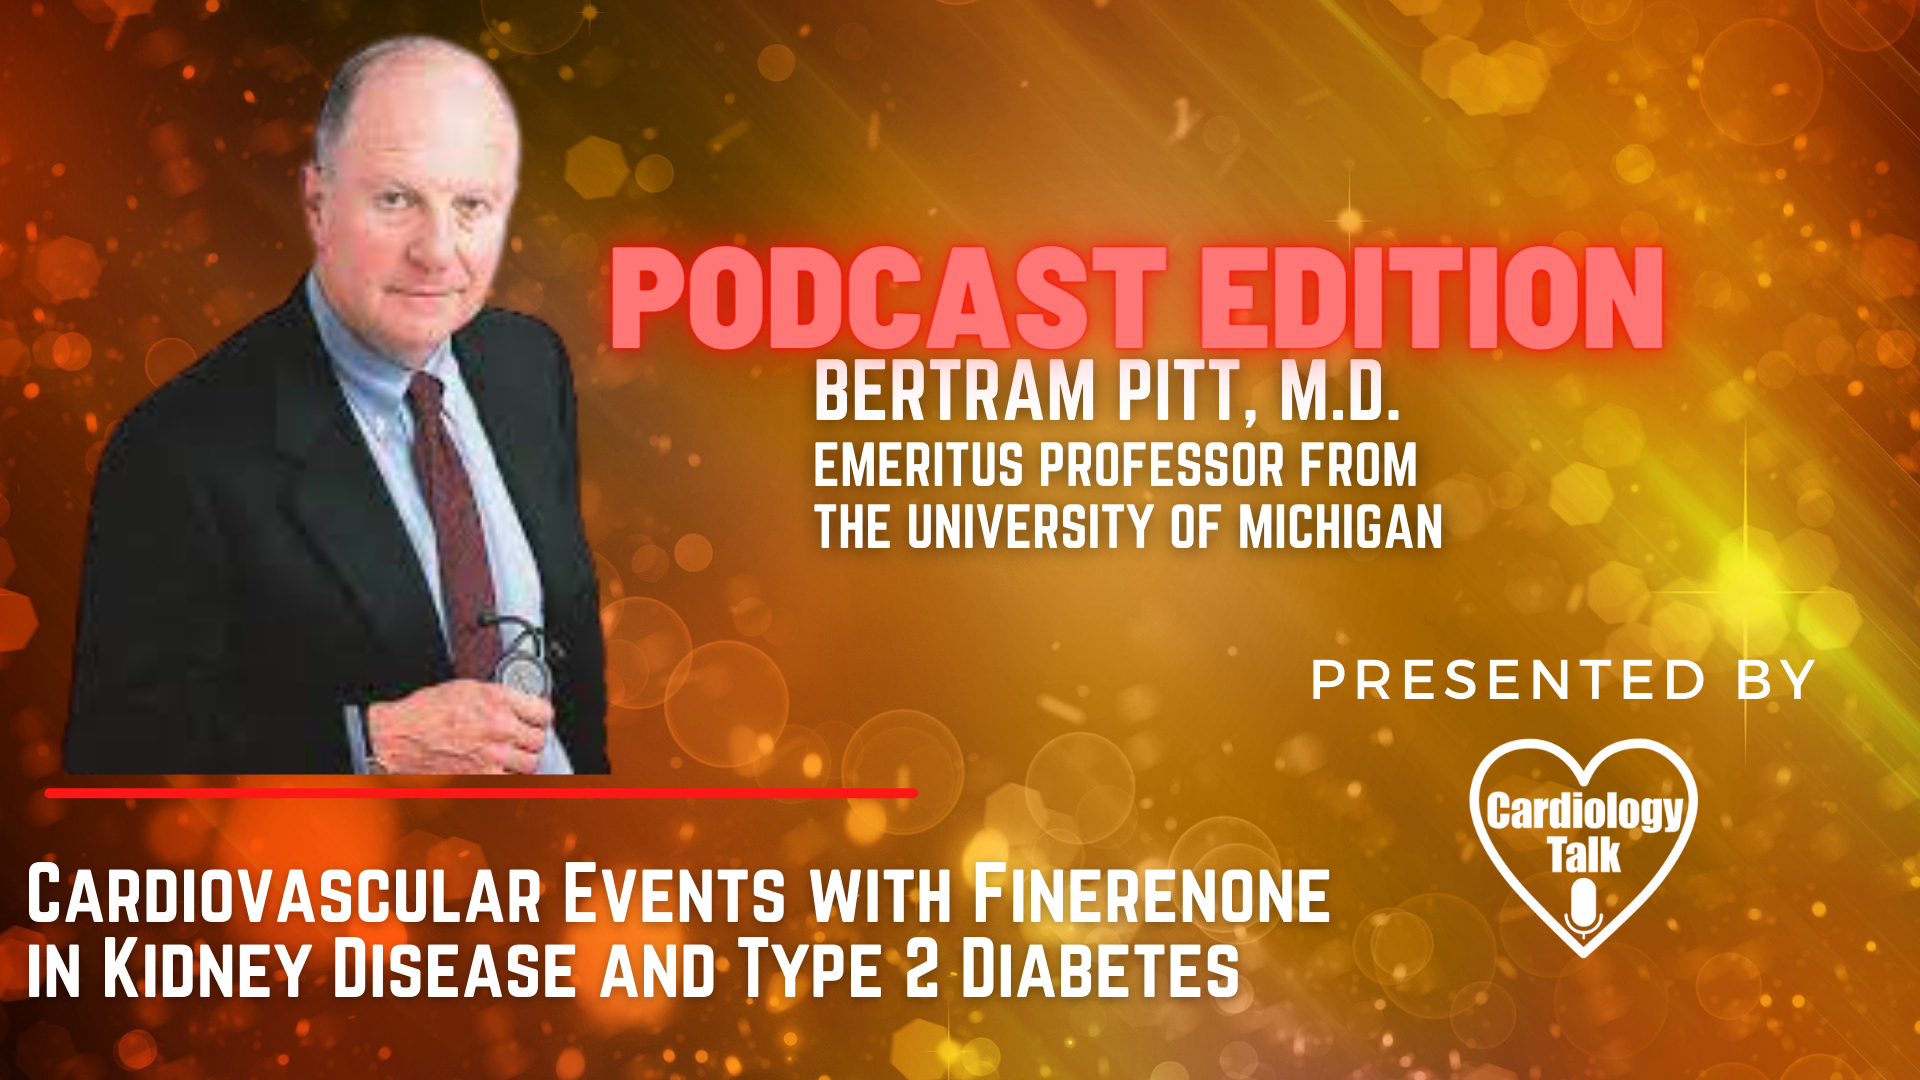 Podcast- Bertram Pitt, M.D. - @UMich @UMichCardiology #CardiovascularEvents #Cardiology #Research  Cardiovascular Events with Finerenone in Kidney Disease and Type 2 Diabetes